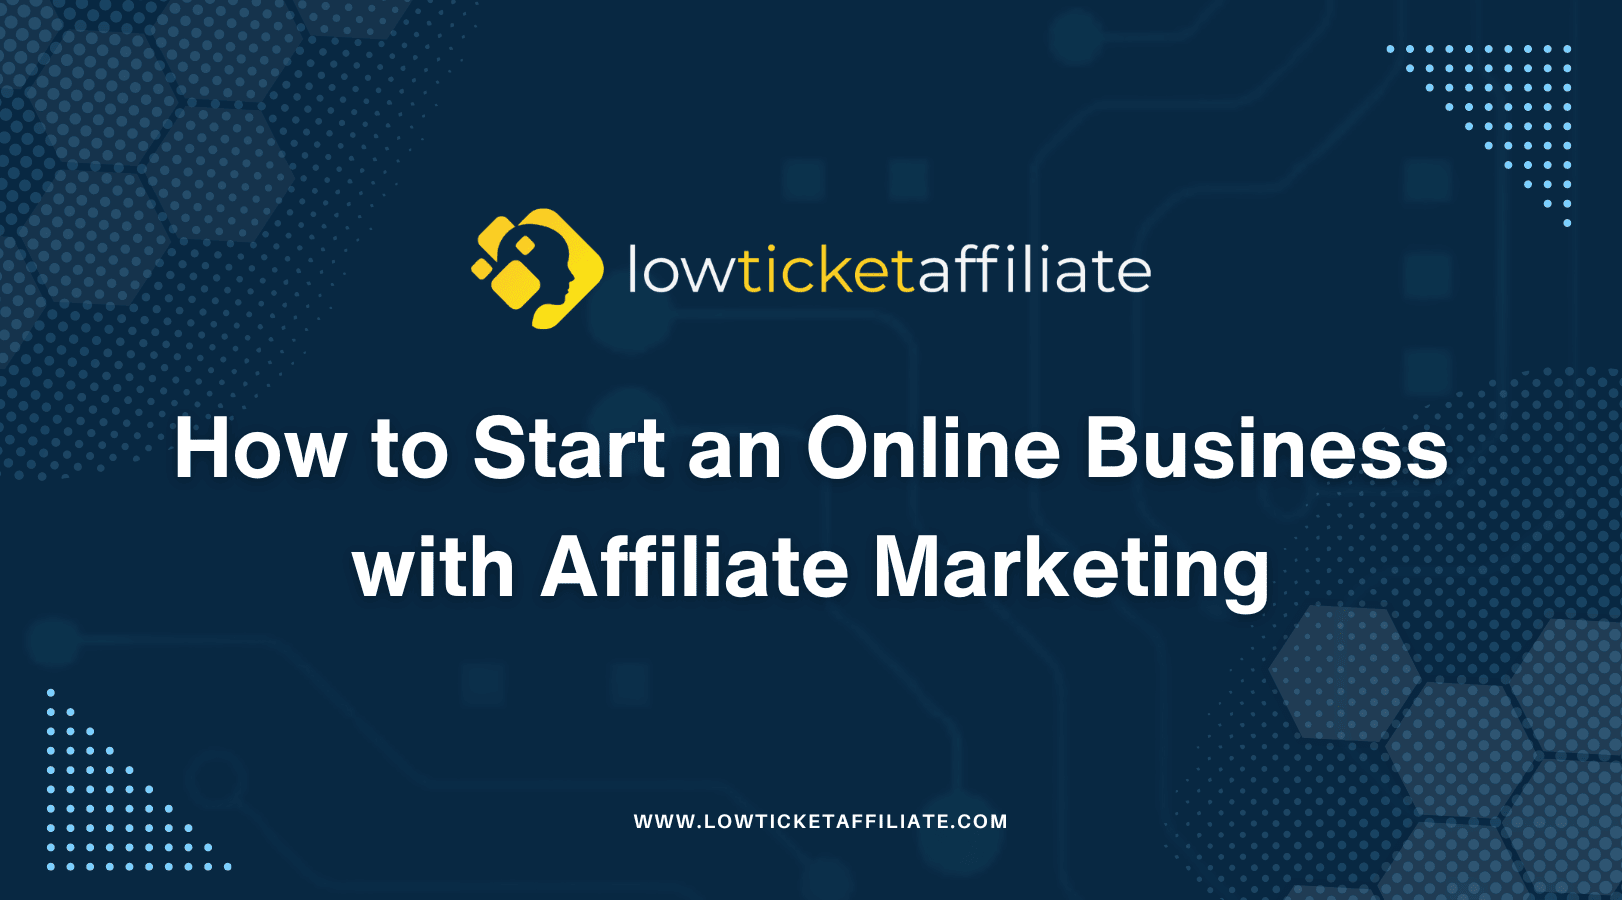 How to Start an Online Business with Affiliate Marketing